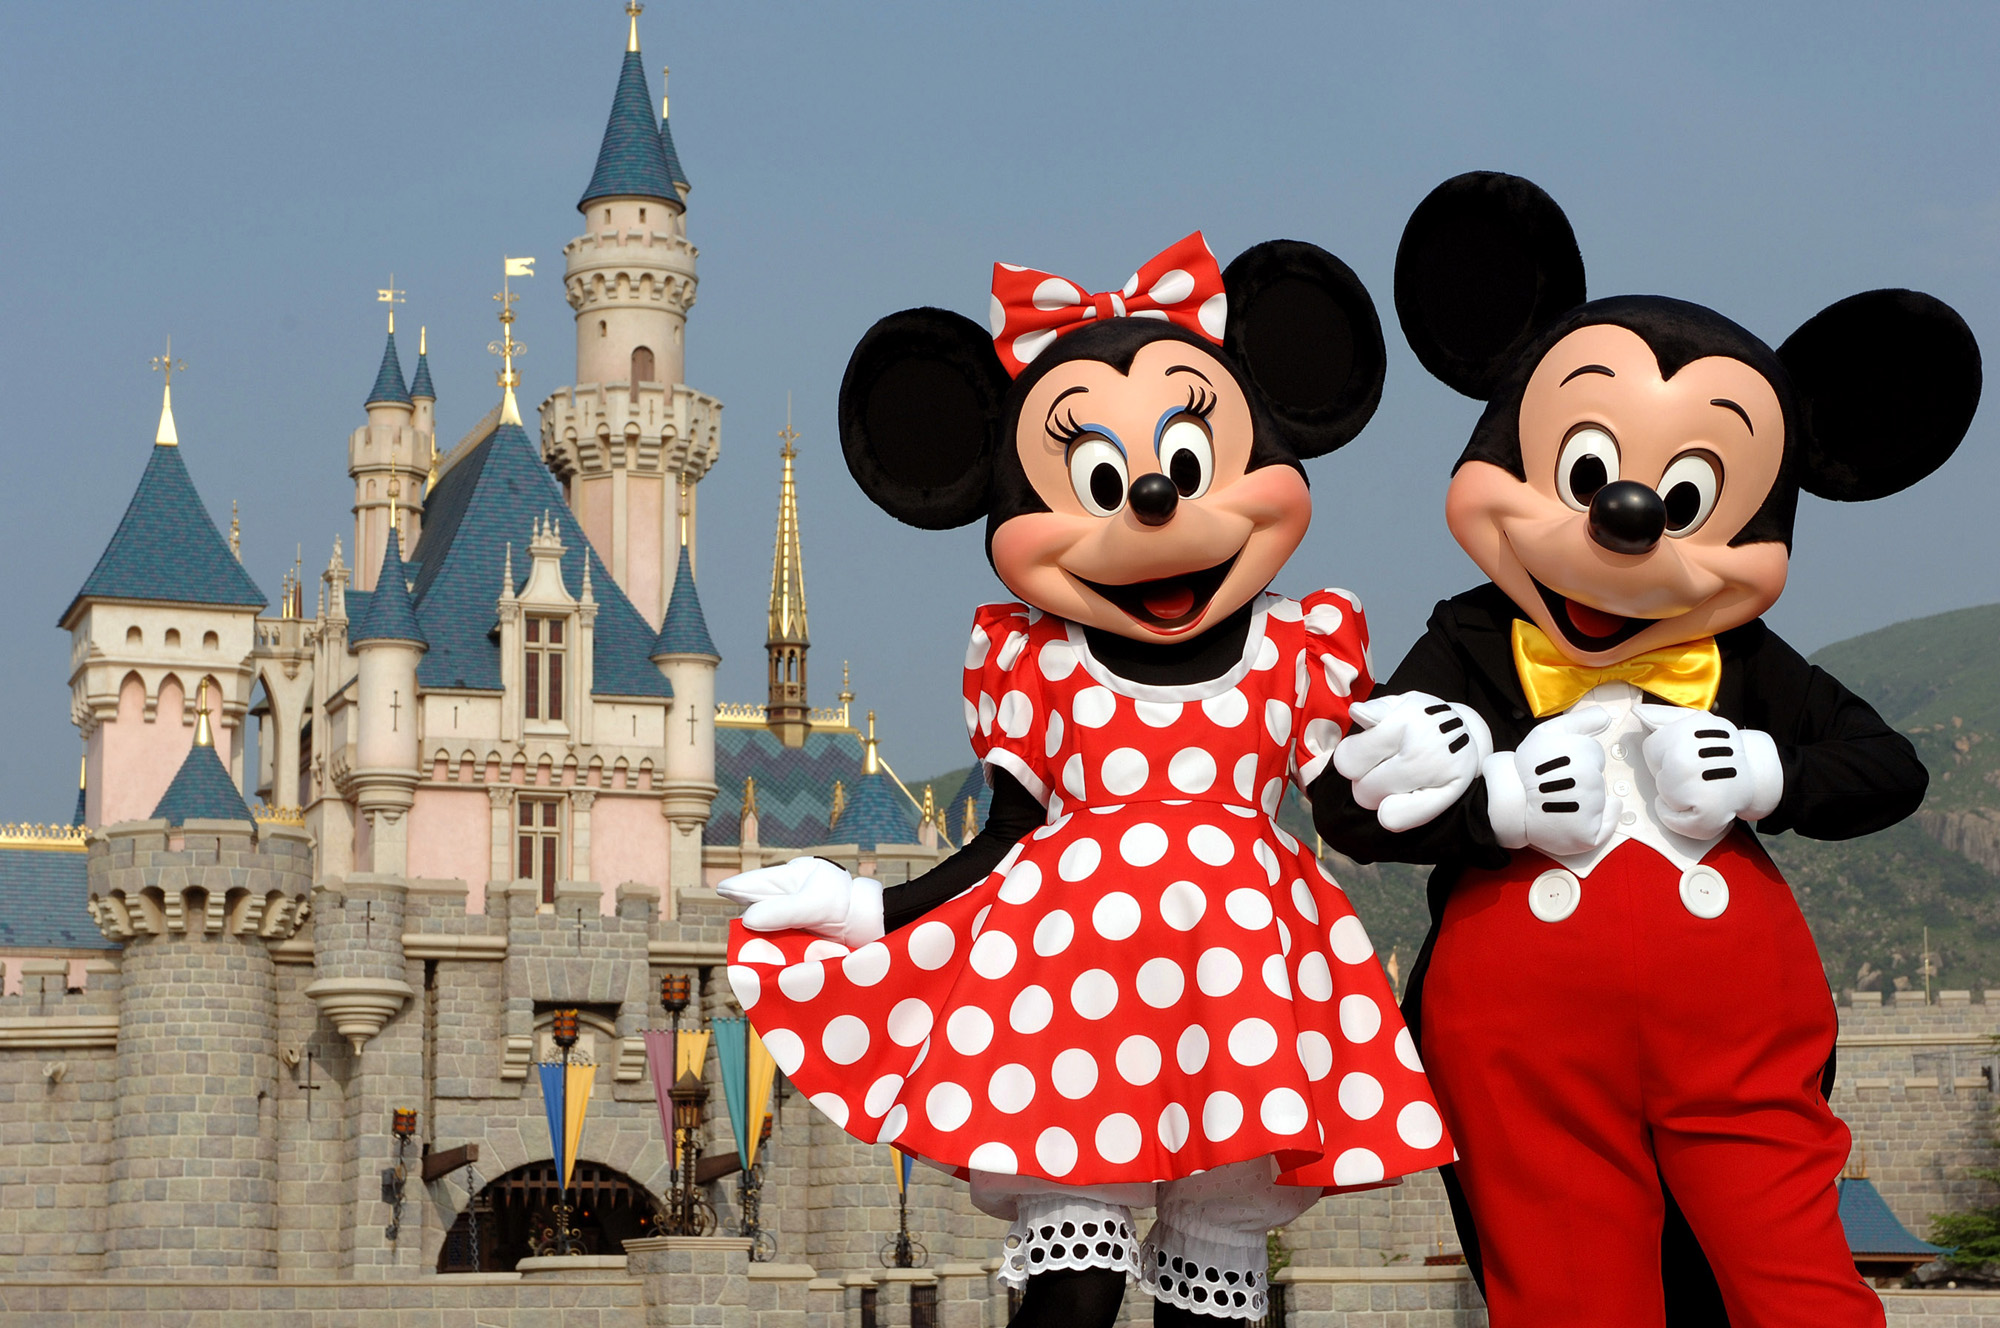 **FOR IMMEDIATE RELEAE** In this photo released by Hong Kong Disneyland, Disney characters Mickey Mouse and Minnie Mouse pose in front of the Sleeping Beauty Castle in Hong Kong's Disneyland Park, Sept. 1, 2005. (AP Photo/Disneyland, Mark Ashman)